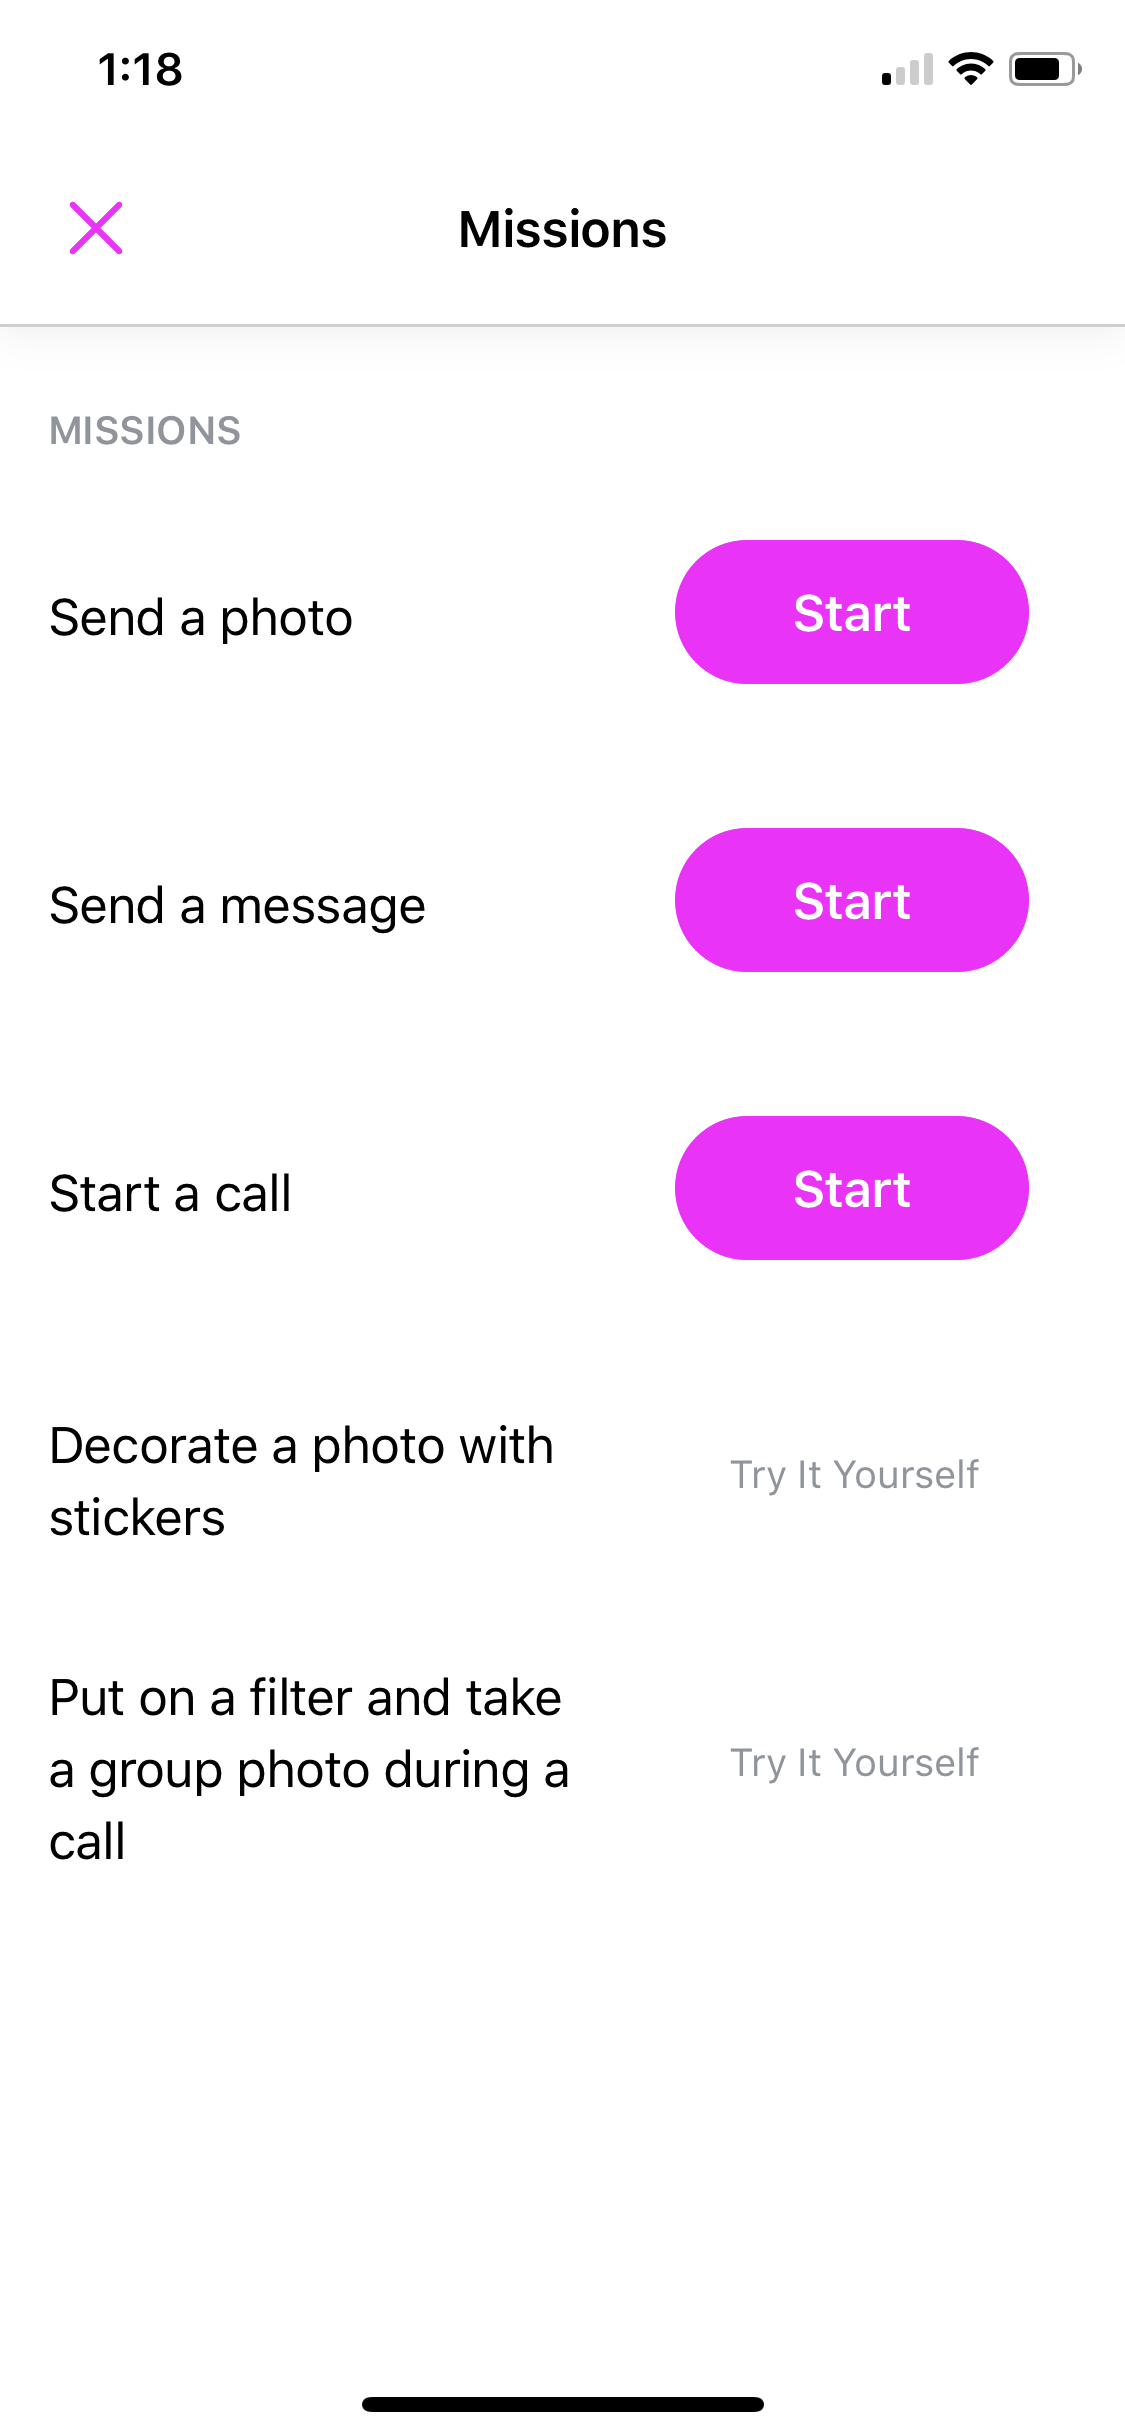 How to use messenger kids while traveling